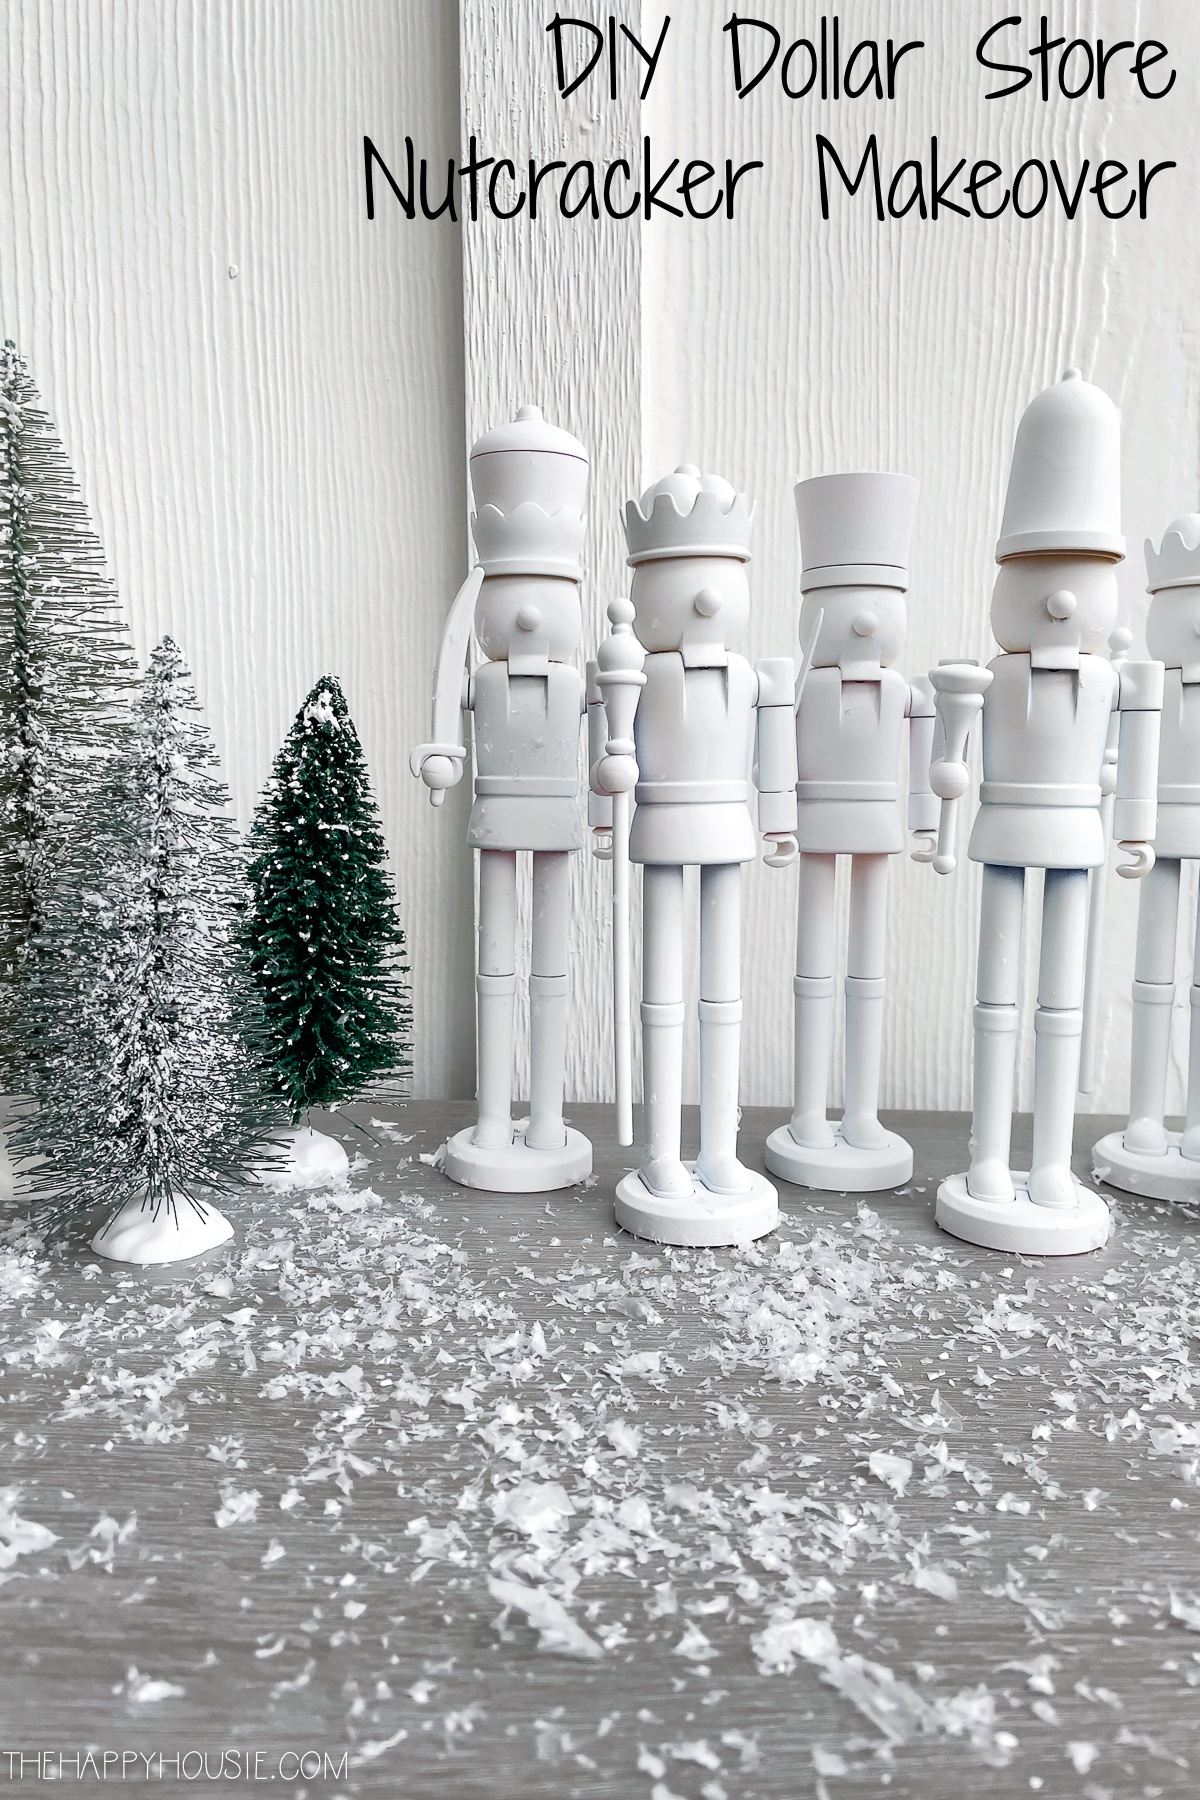 The white nutcrackers lined up beside the trees.